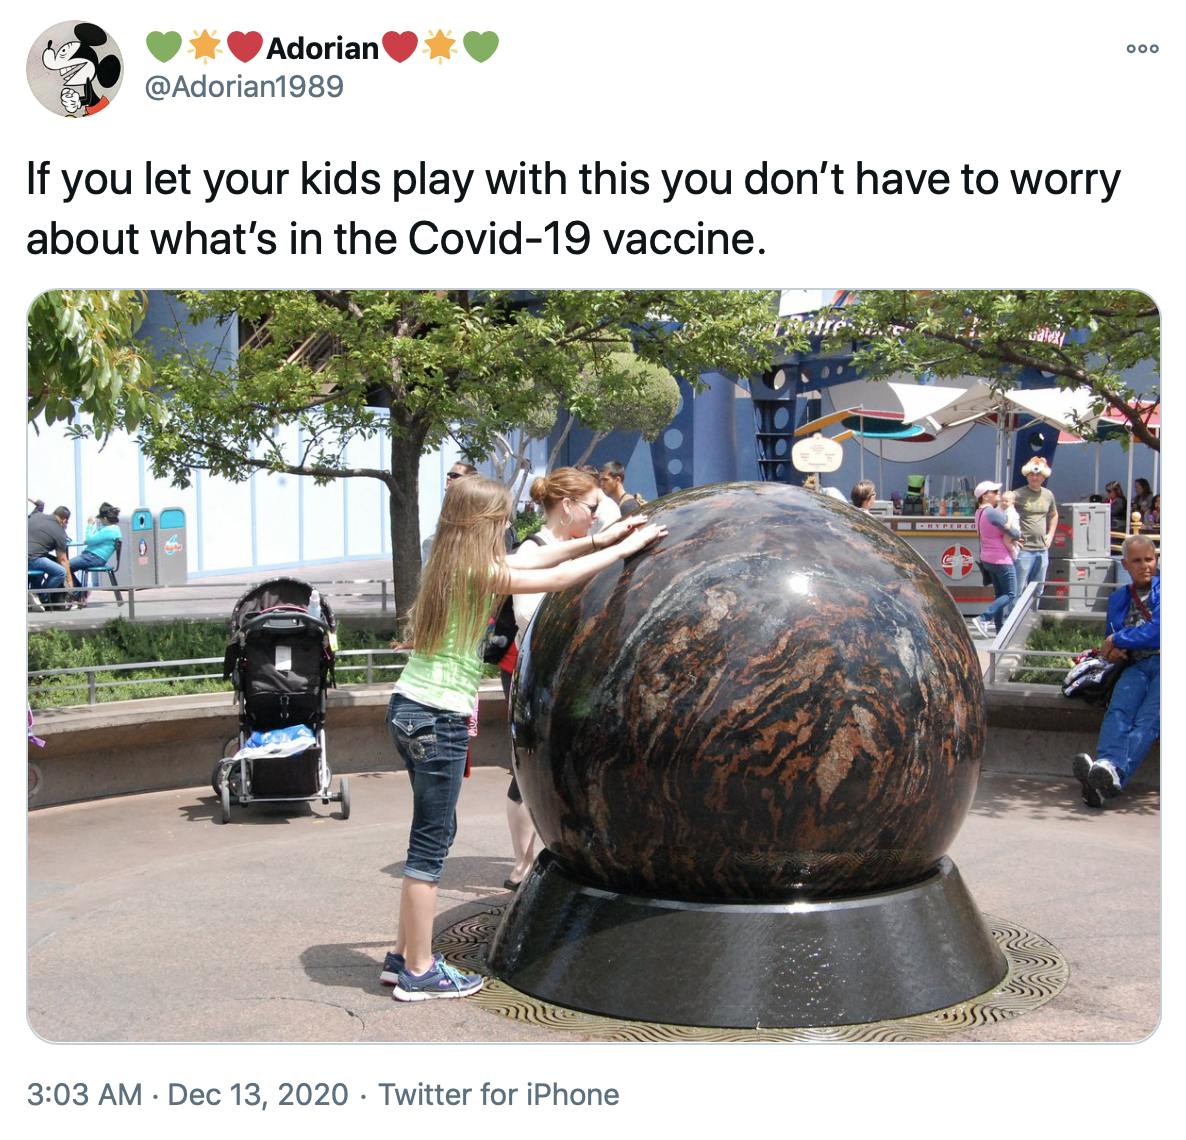 'If you let your kids play with this you don’t have to worry about what’s in the Covid-19 vaccine.' a child with long blonde hair is touching a giant stone ball revolving in a fountain